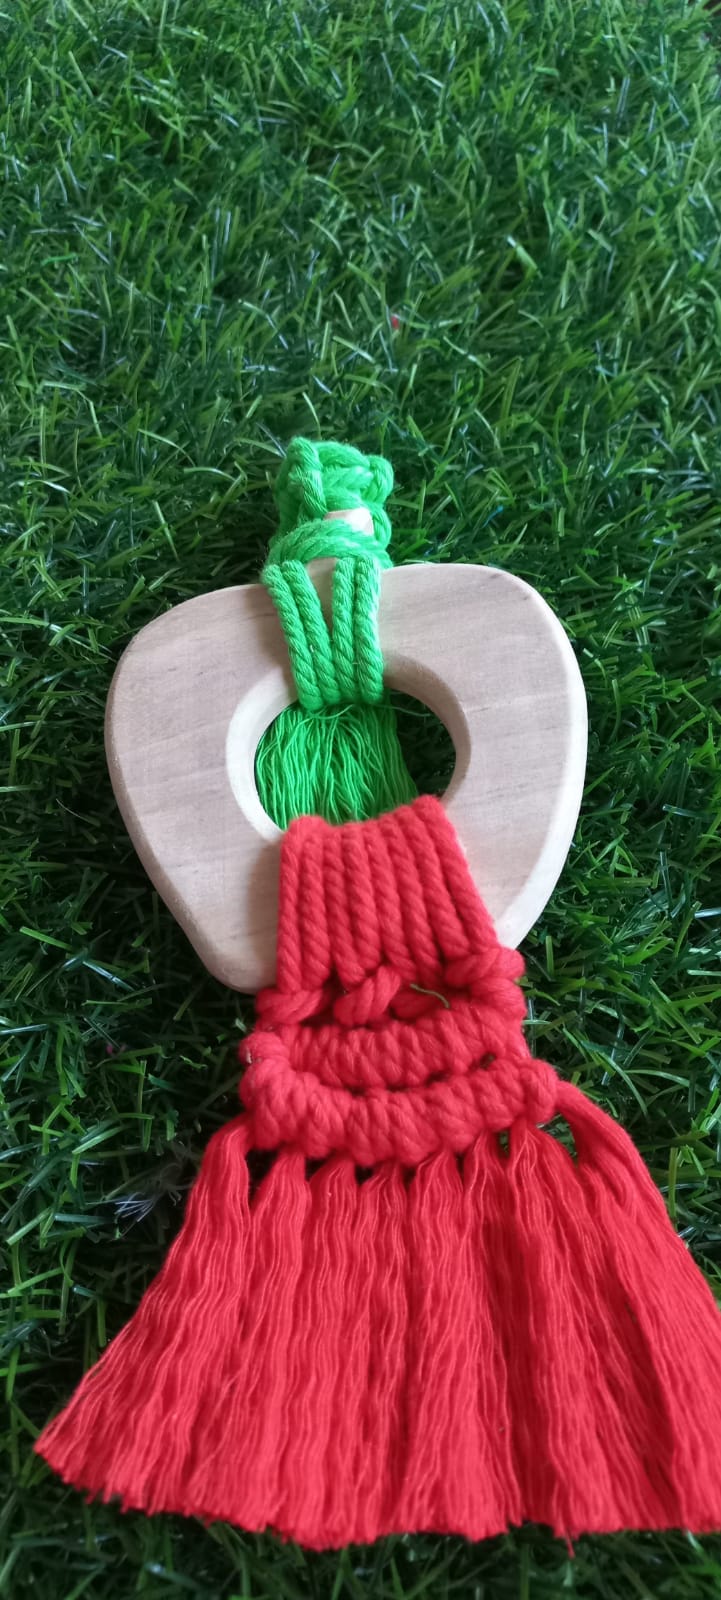 Soothe your teething baby naturally with our Neem Macrame Teethers, crafted from high-quality neem wood and soft macrame for safe and soothing relief.